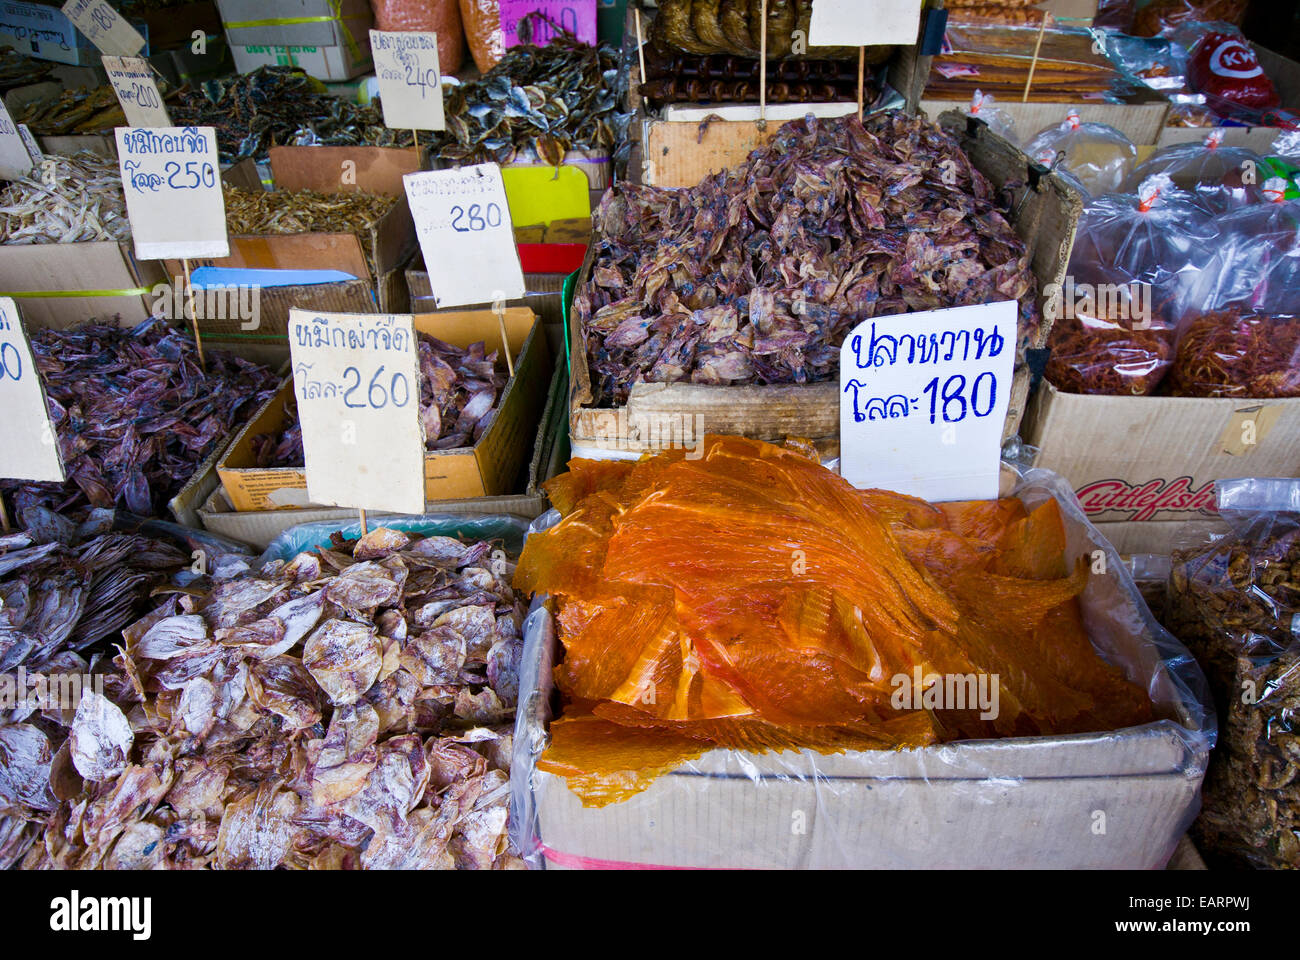 Piles of dried fish and seafood for sale in an open air market. Stock Photo